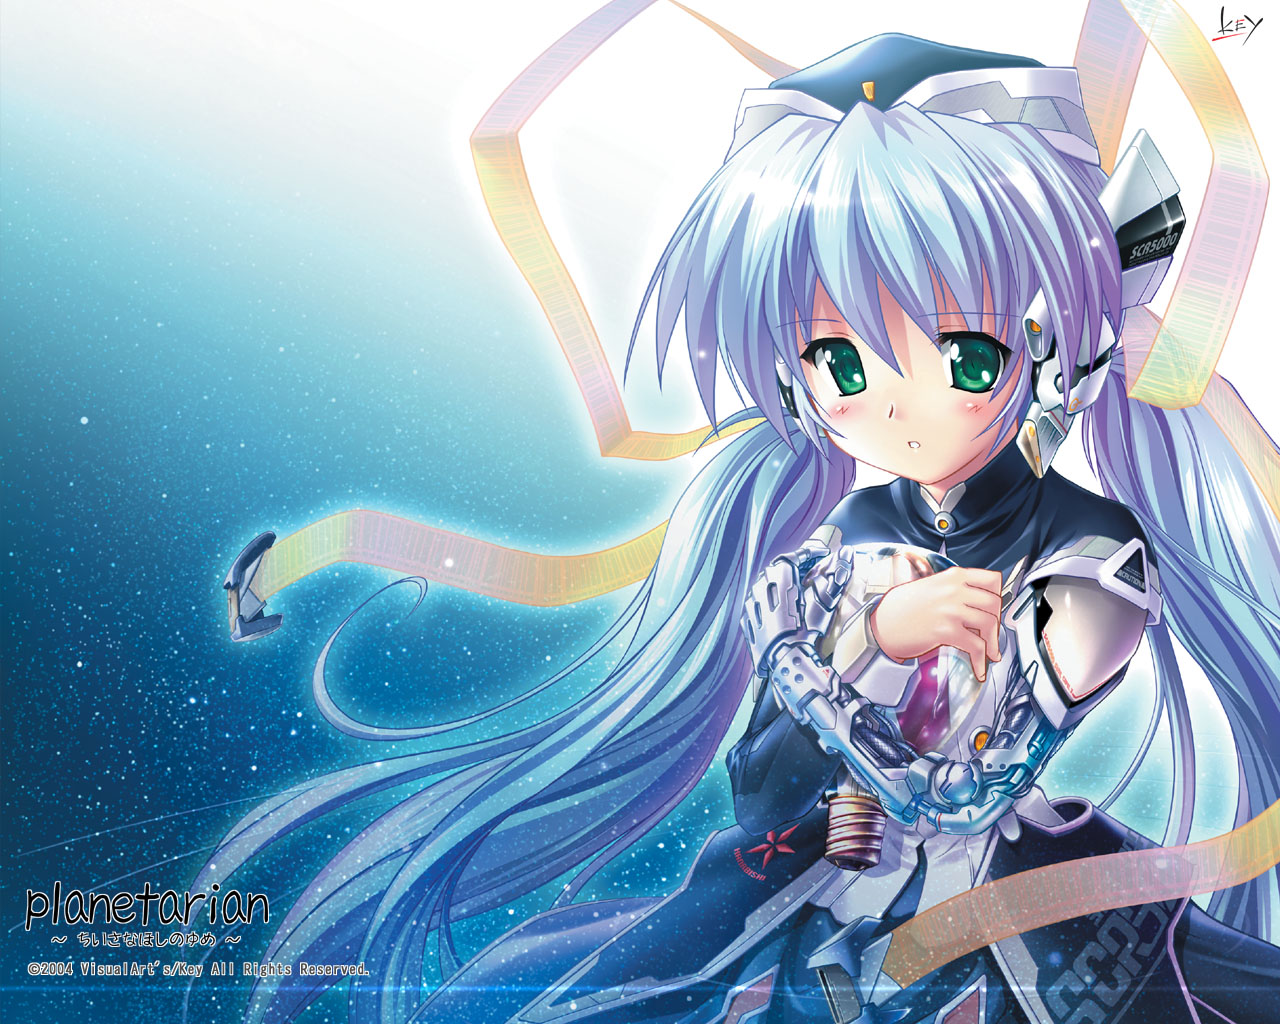 Planetarian - Images Colection